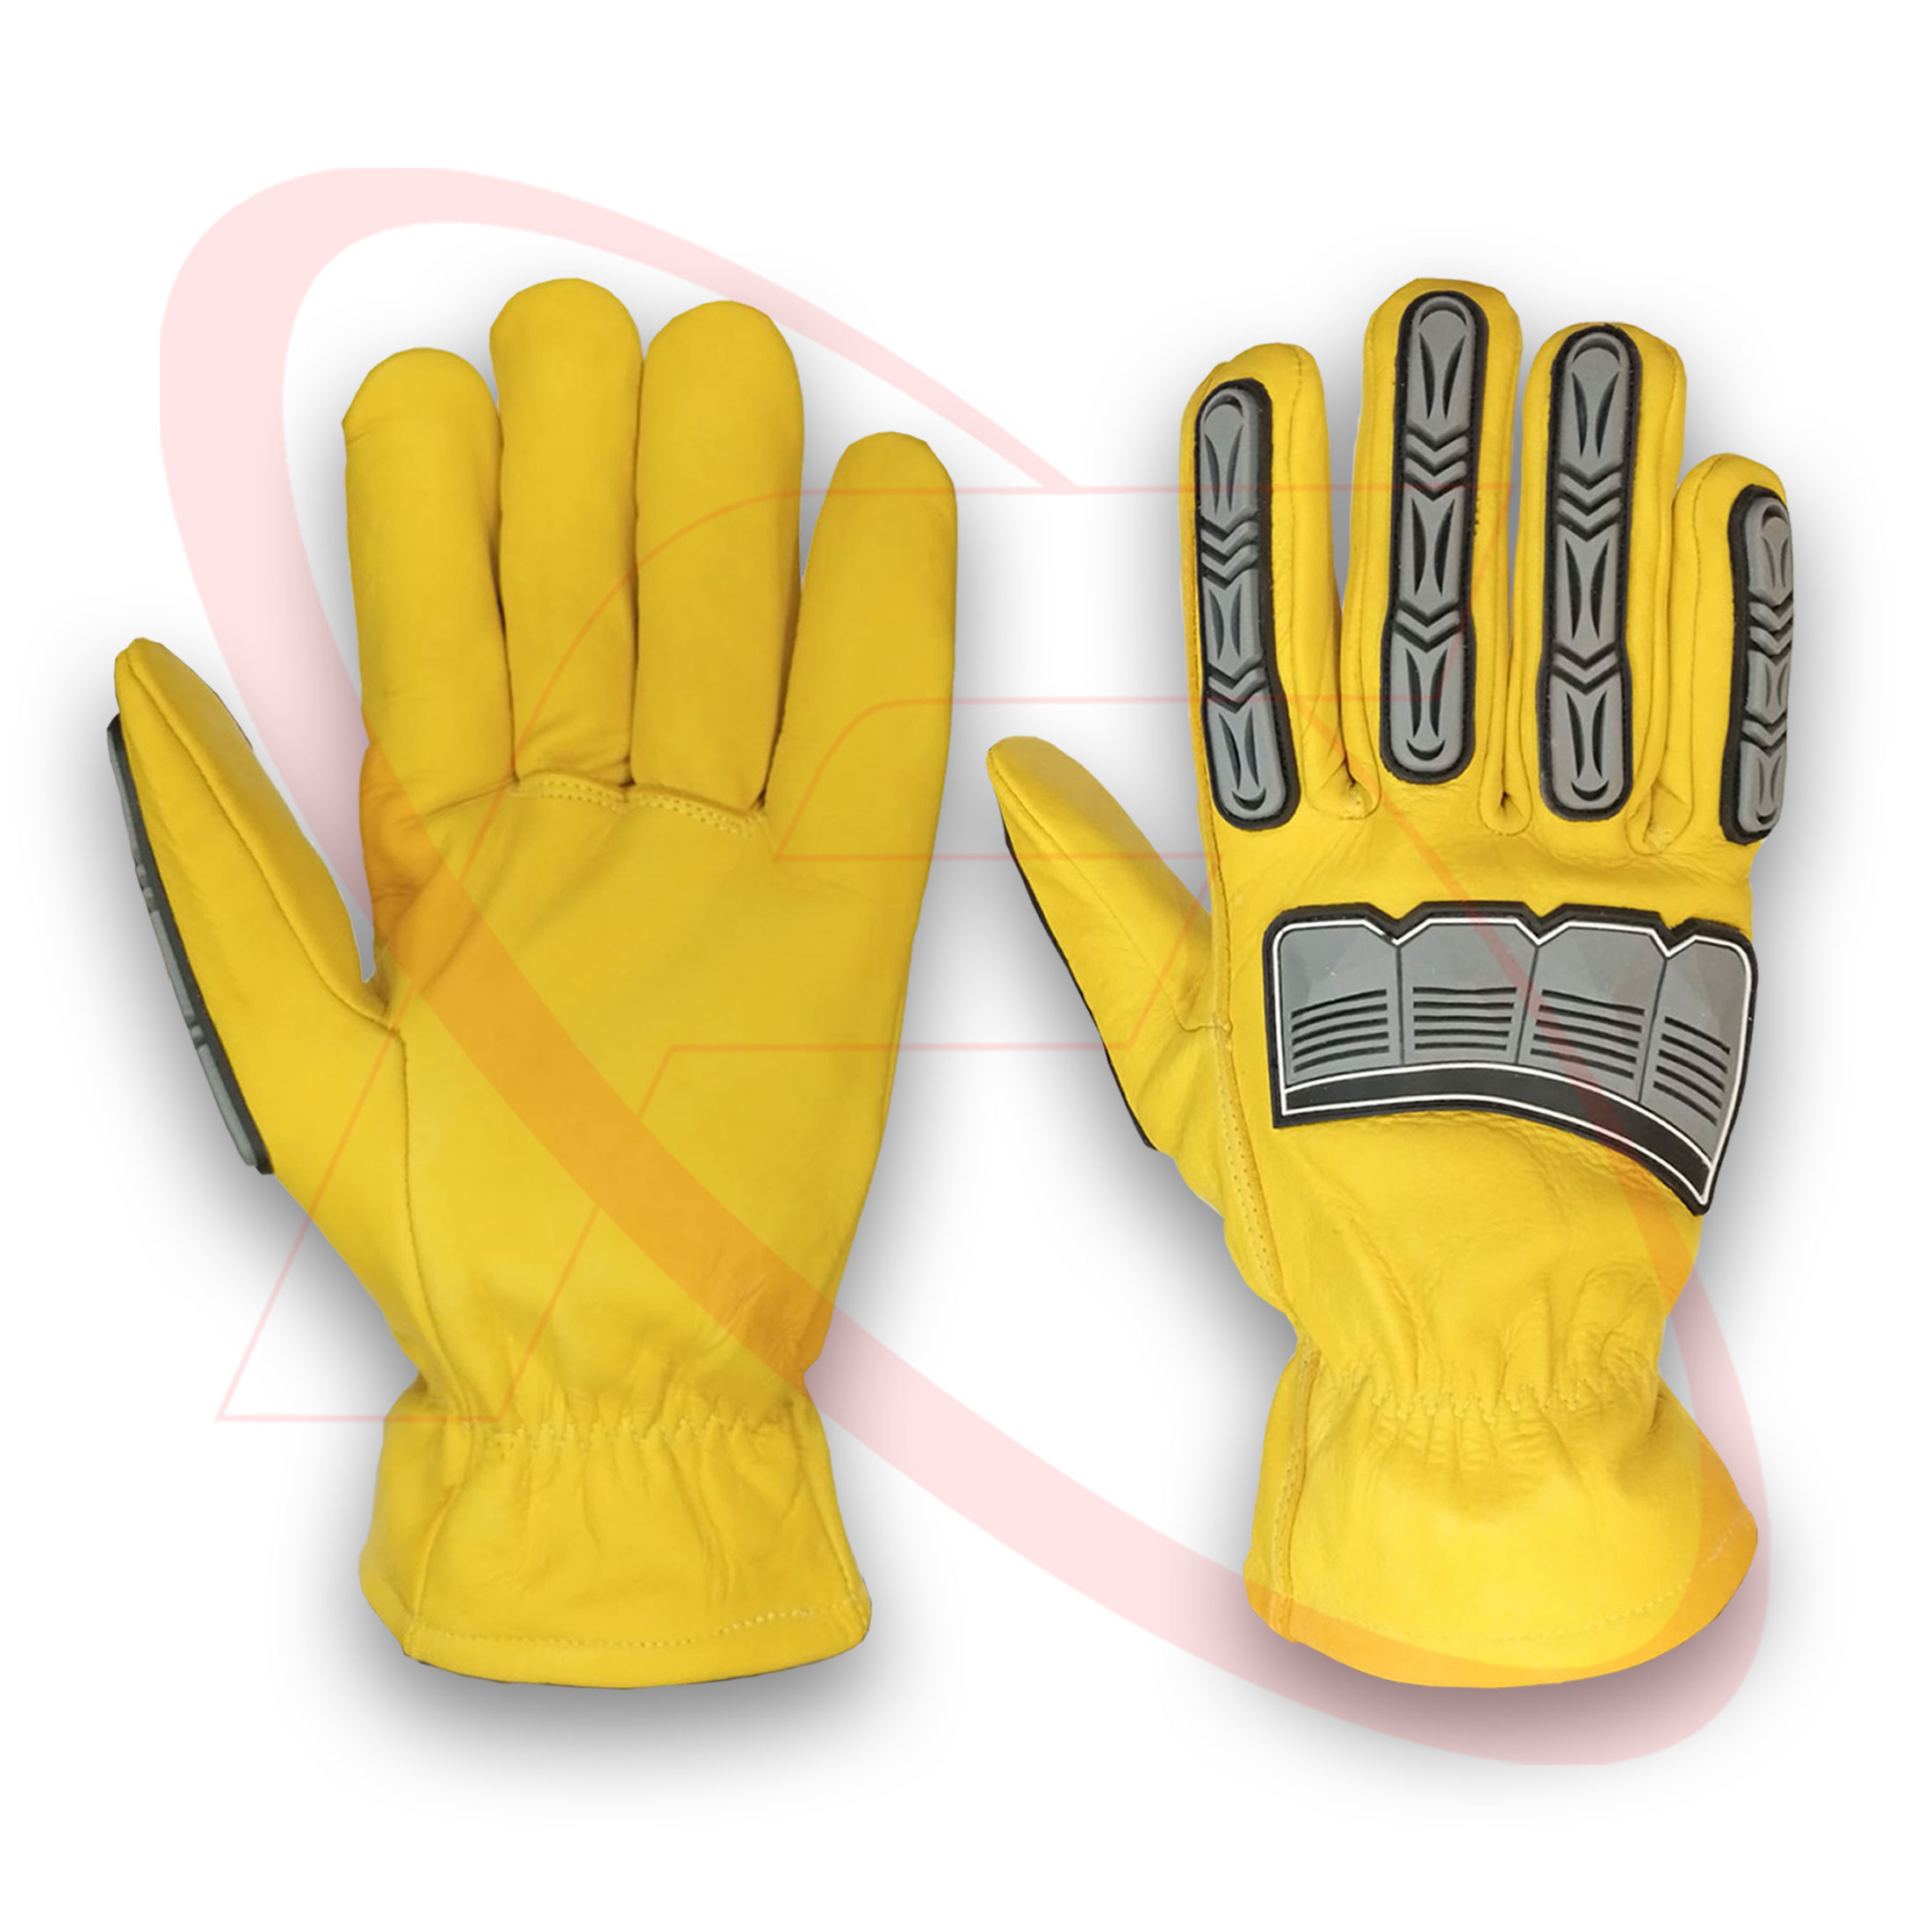 Anti Impact Gloves in Cowhide Leather Safety Work Leather Gloves Wholesale Impact TPR Un-lined Driver Gloves